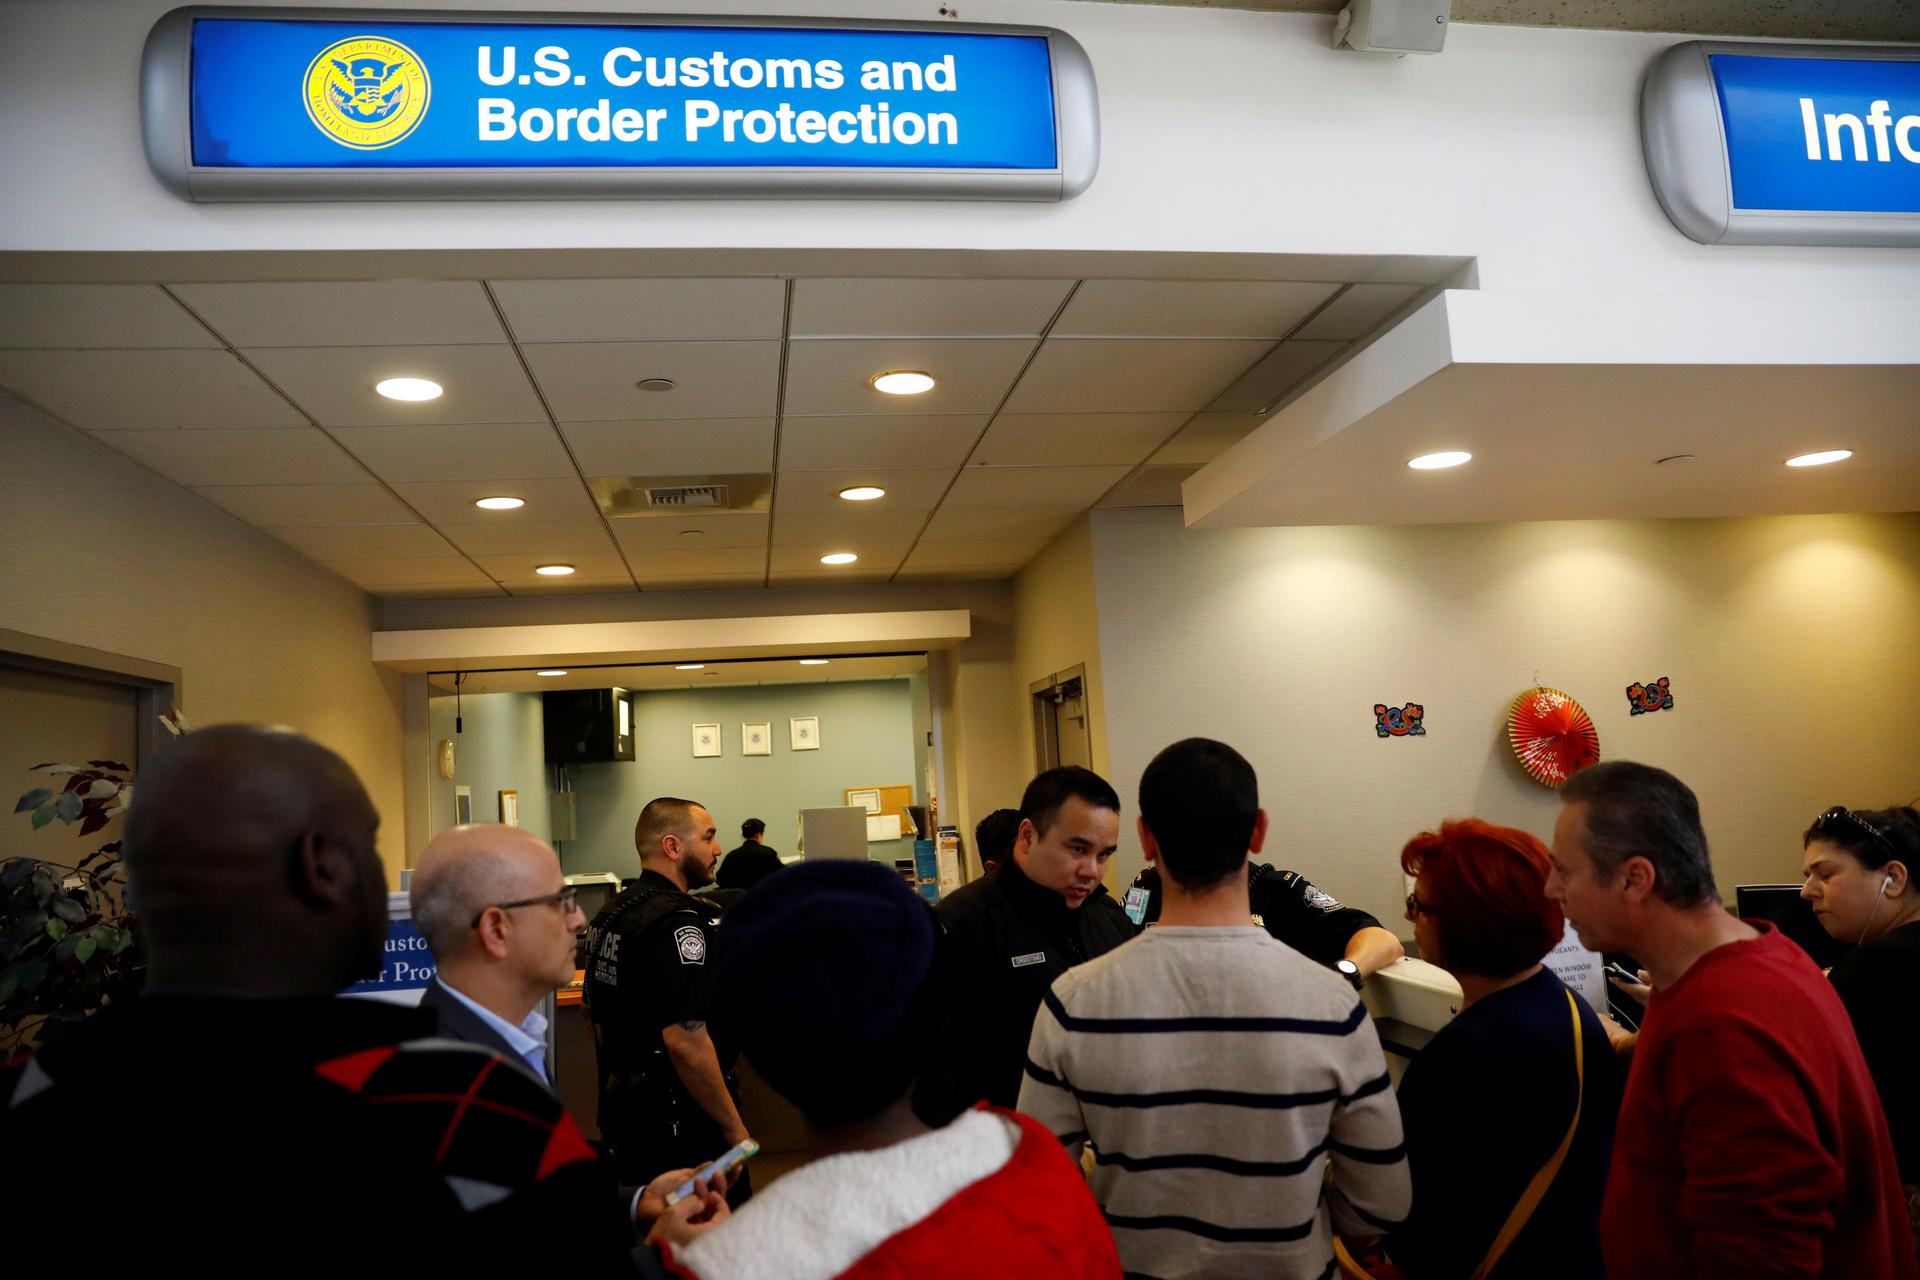 US Customs and Border Protection officers stand outside an office during the travel ban at Los Angeles International Airport (LAX) in Los Angeles, California, January 28, 2017.